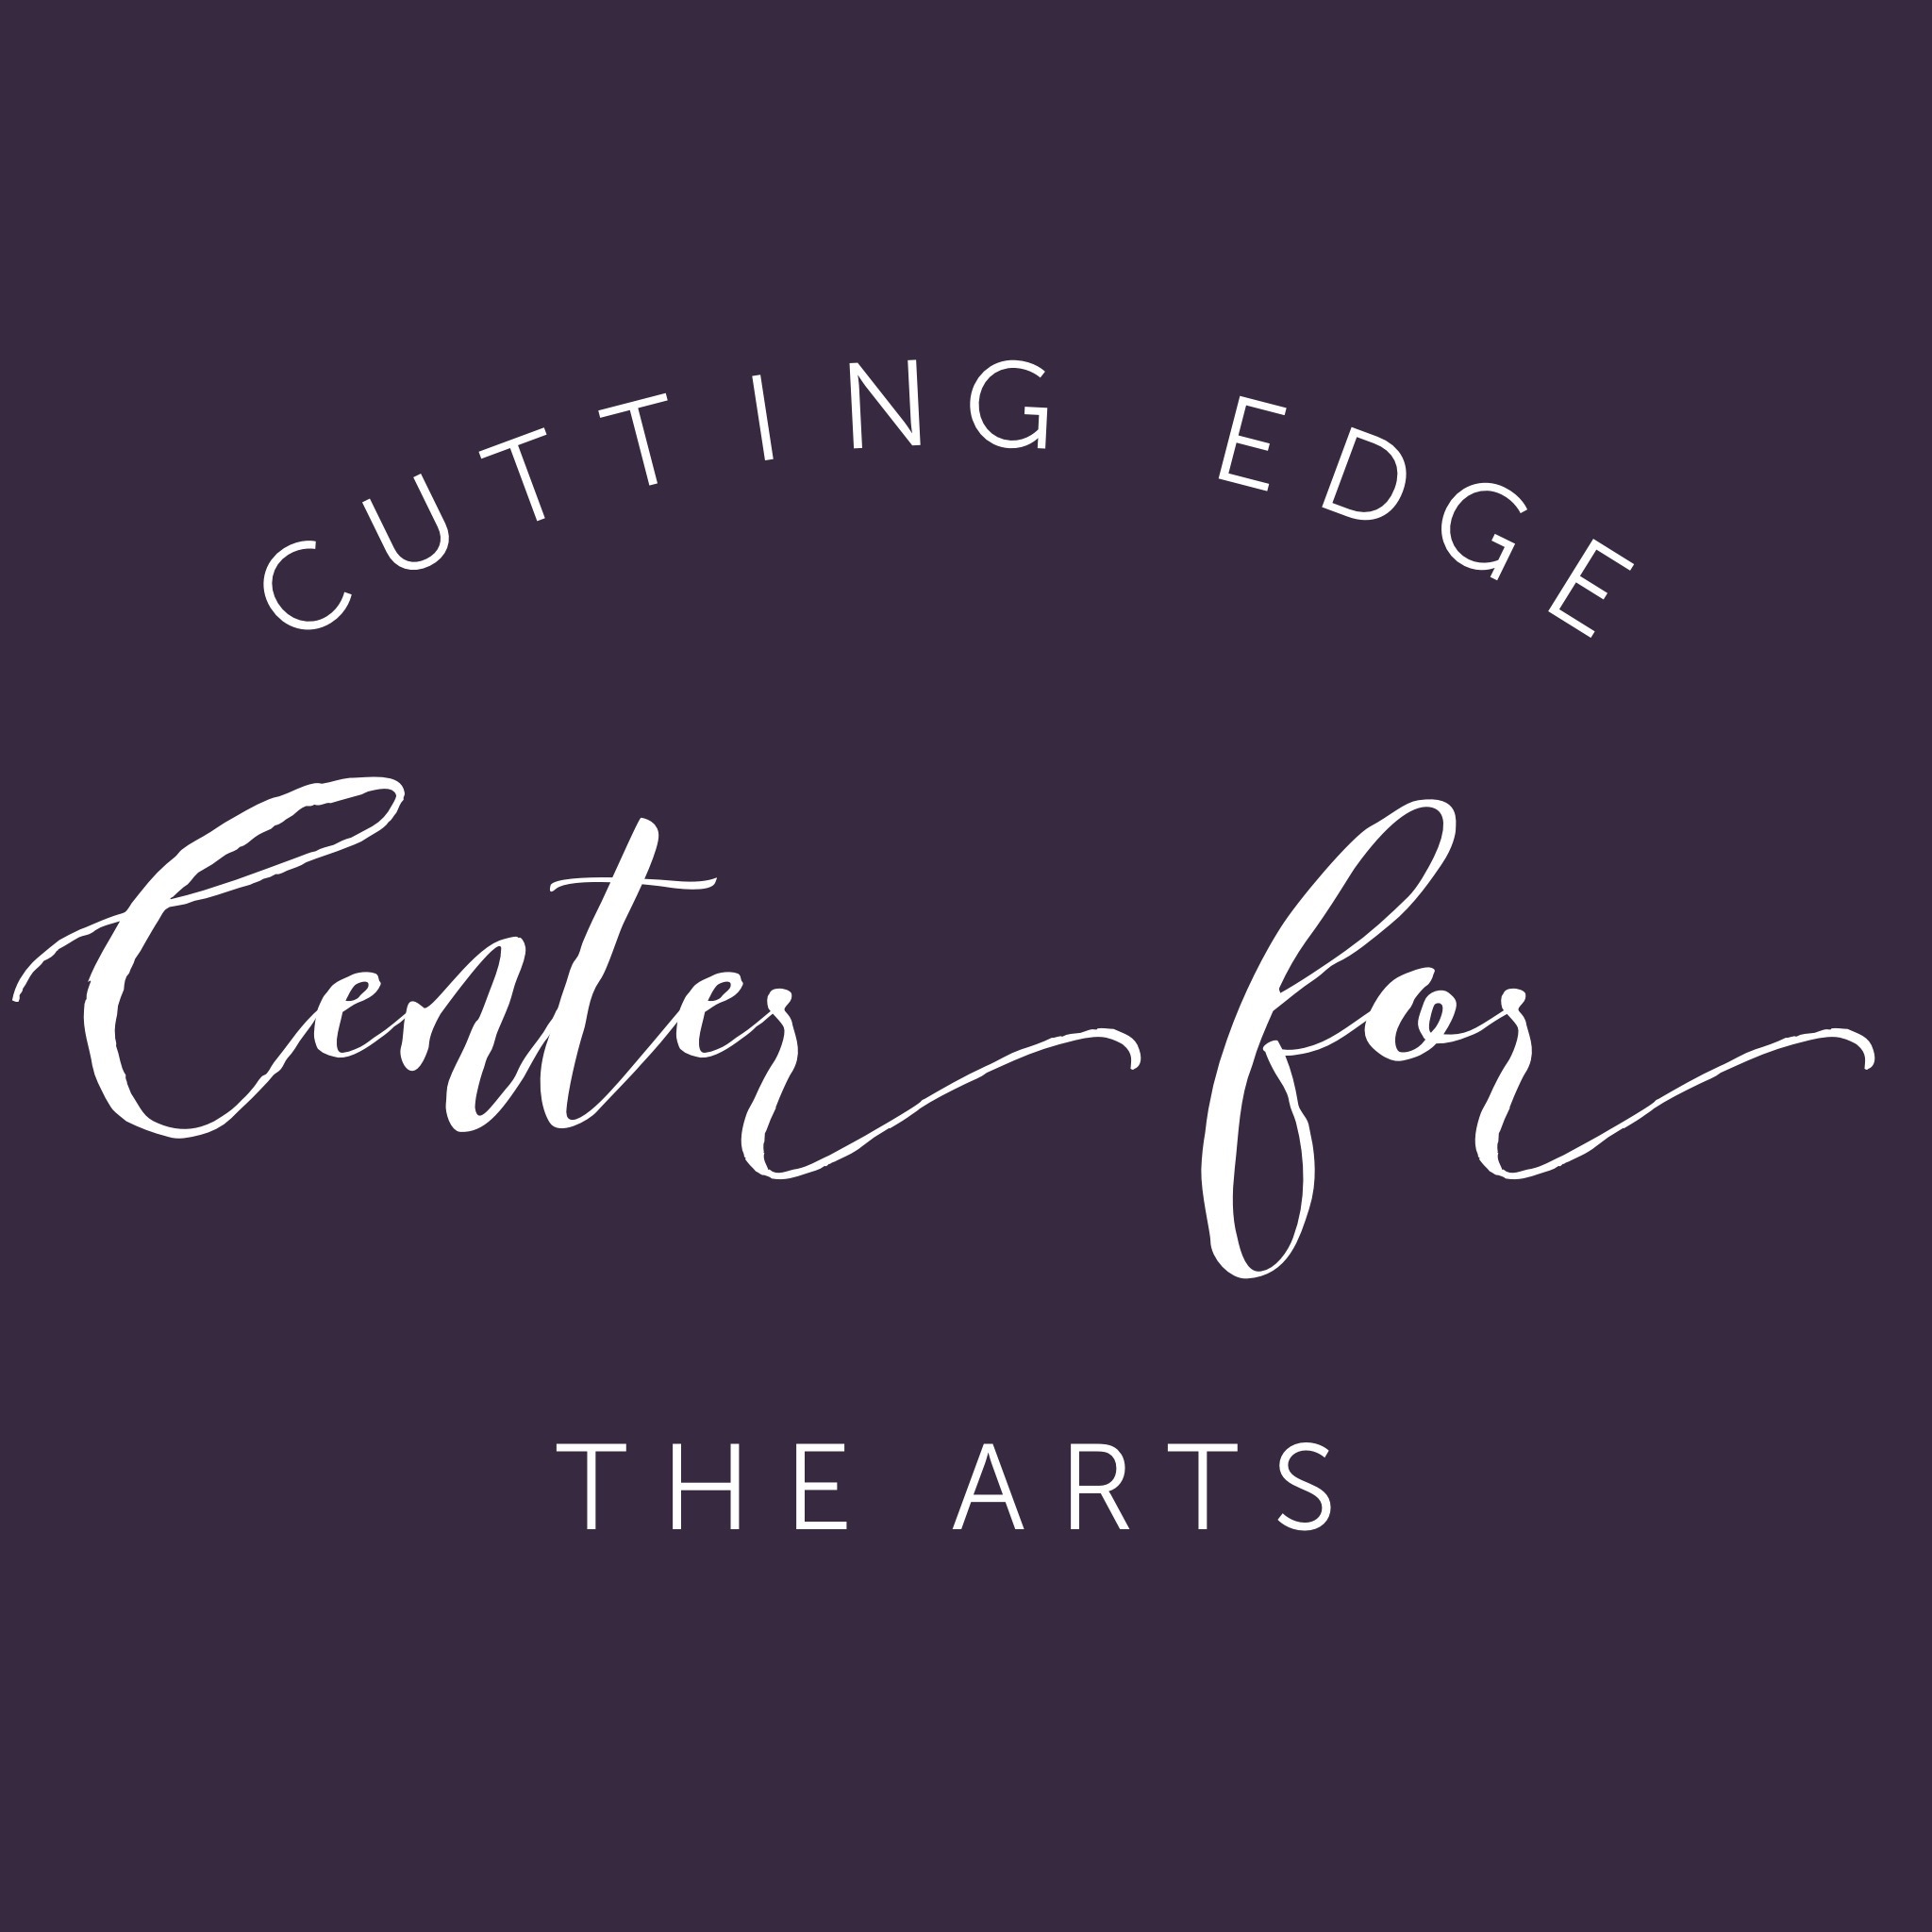 Cutting Edge Center for the Arts